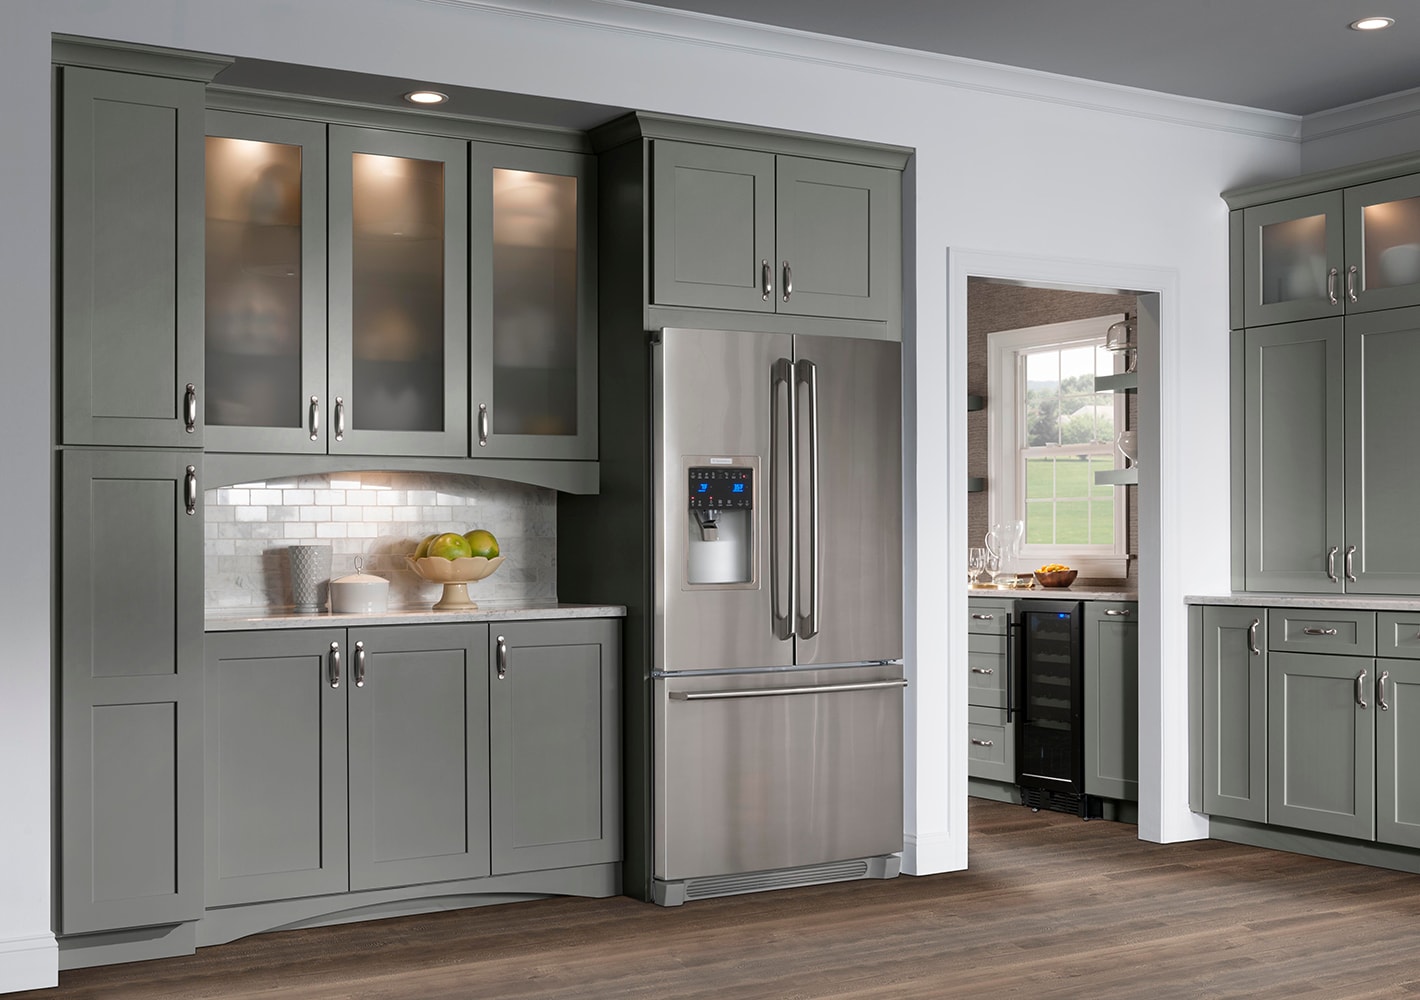 Shenandoah Mission 14.562-in W x 14.5-in H Sage Painted Kitchen